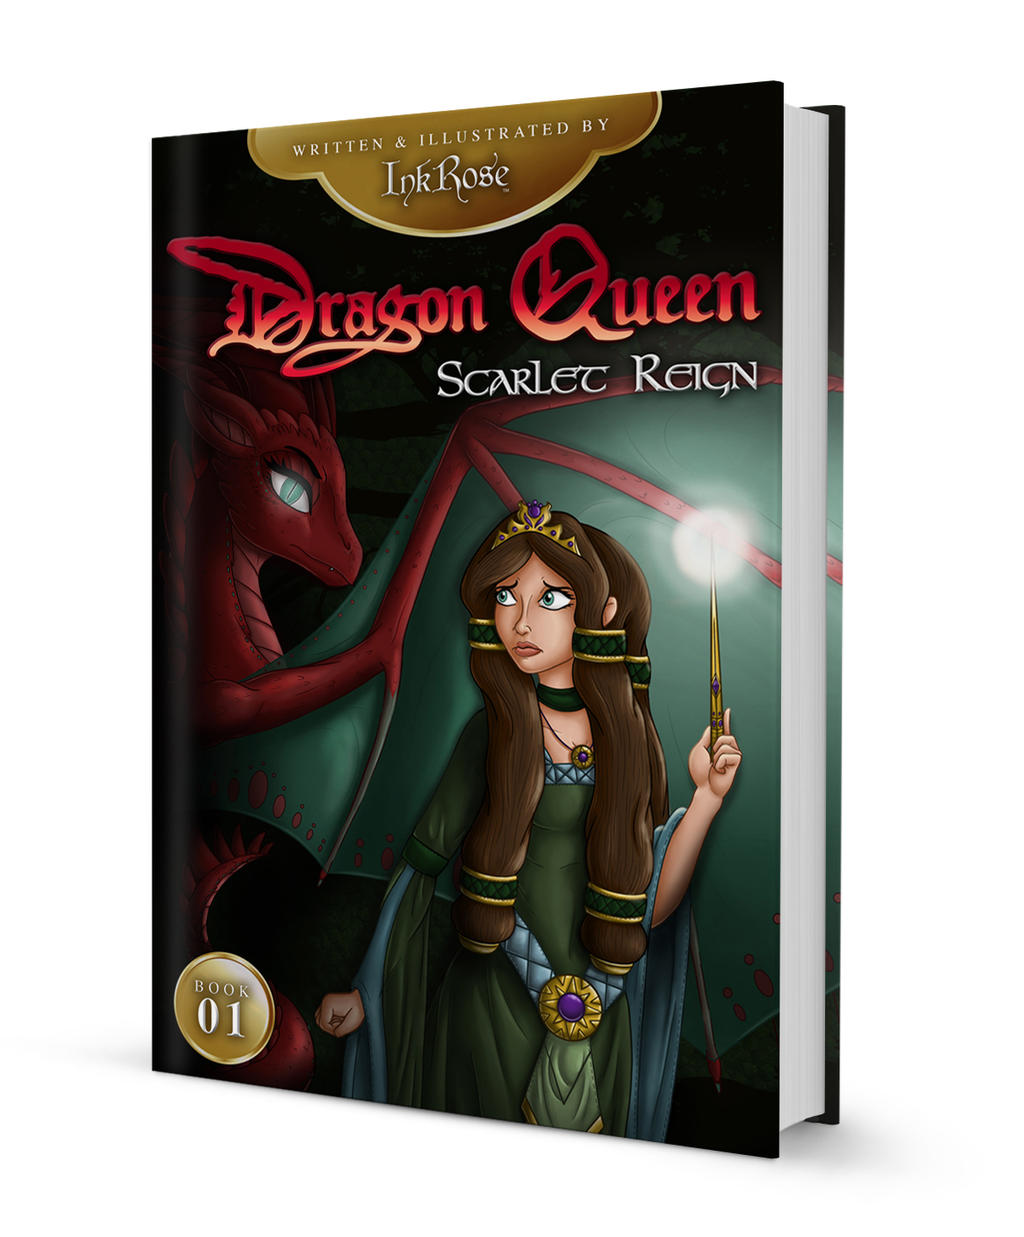 Dragon Queen: Scarlet Reign Now Avaliable!